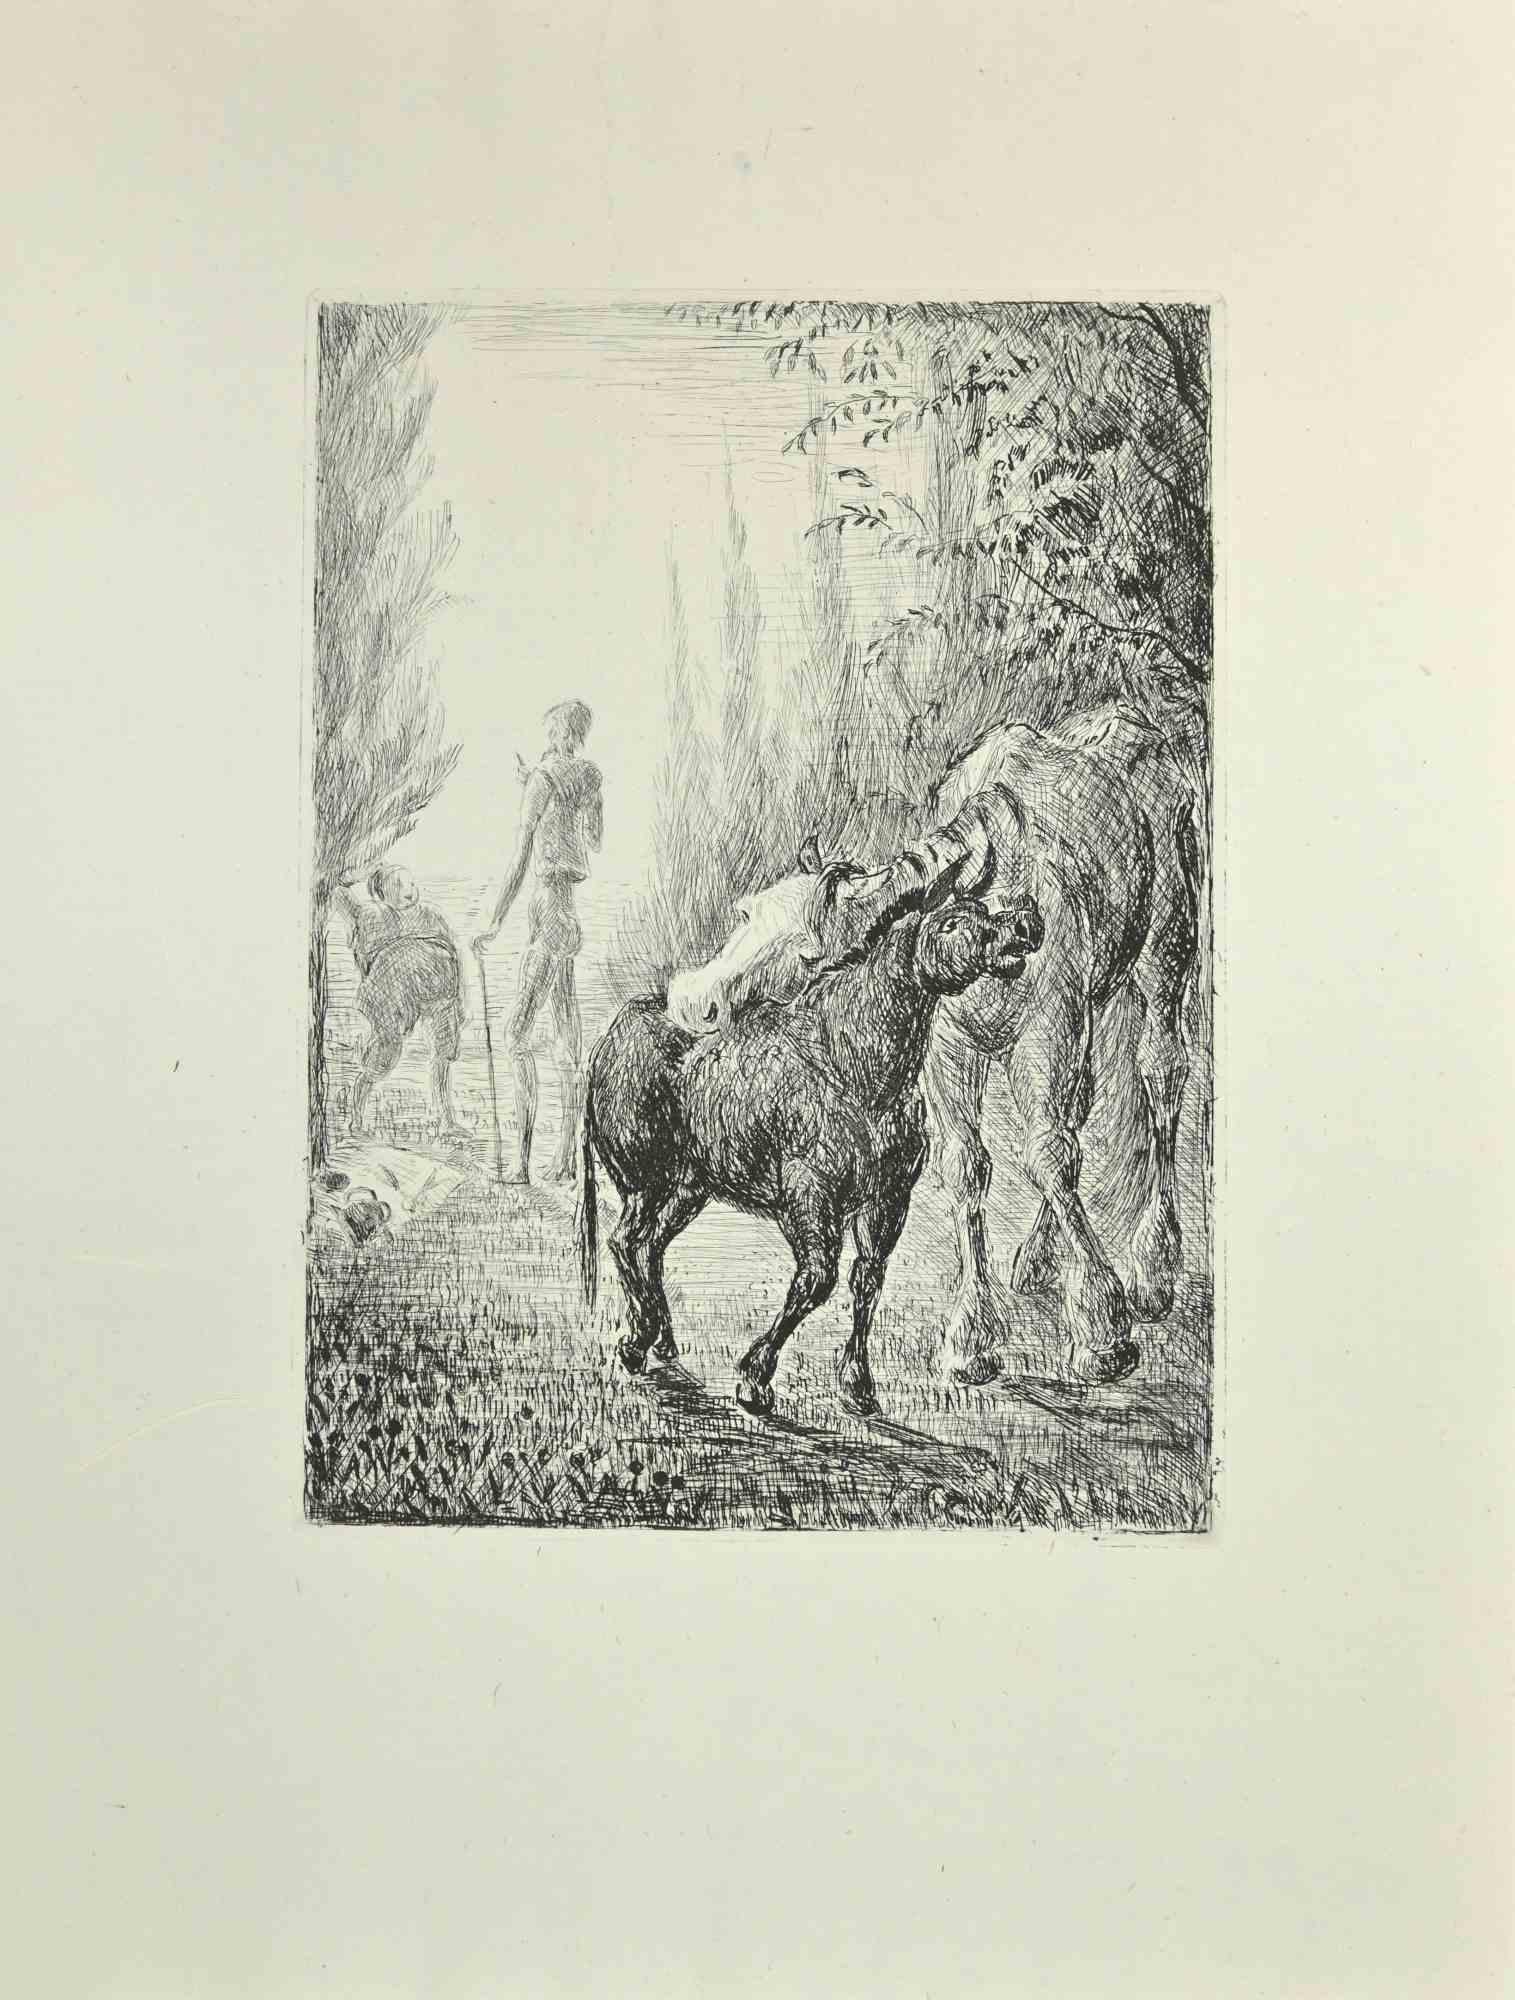 Don Quixote and the Animals is an etching and drypoint print on ivory-colored China paper, realized by Wladyslaw Jahl in 1951.

It belongs to a limited edition of 125 specimens.

Good conditions.

The artwork represents a visual scene from Don